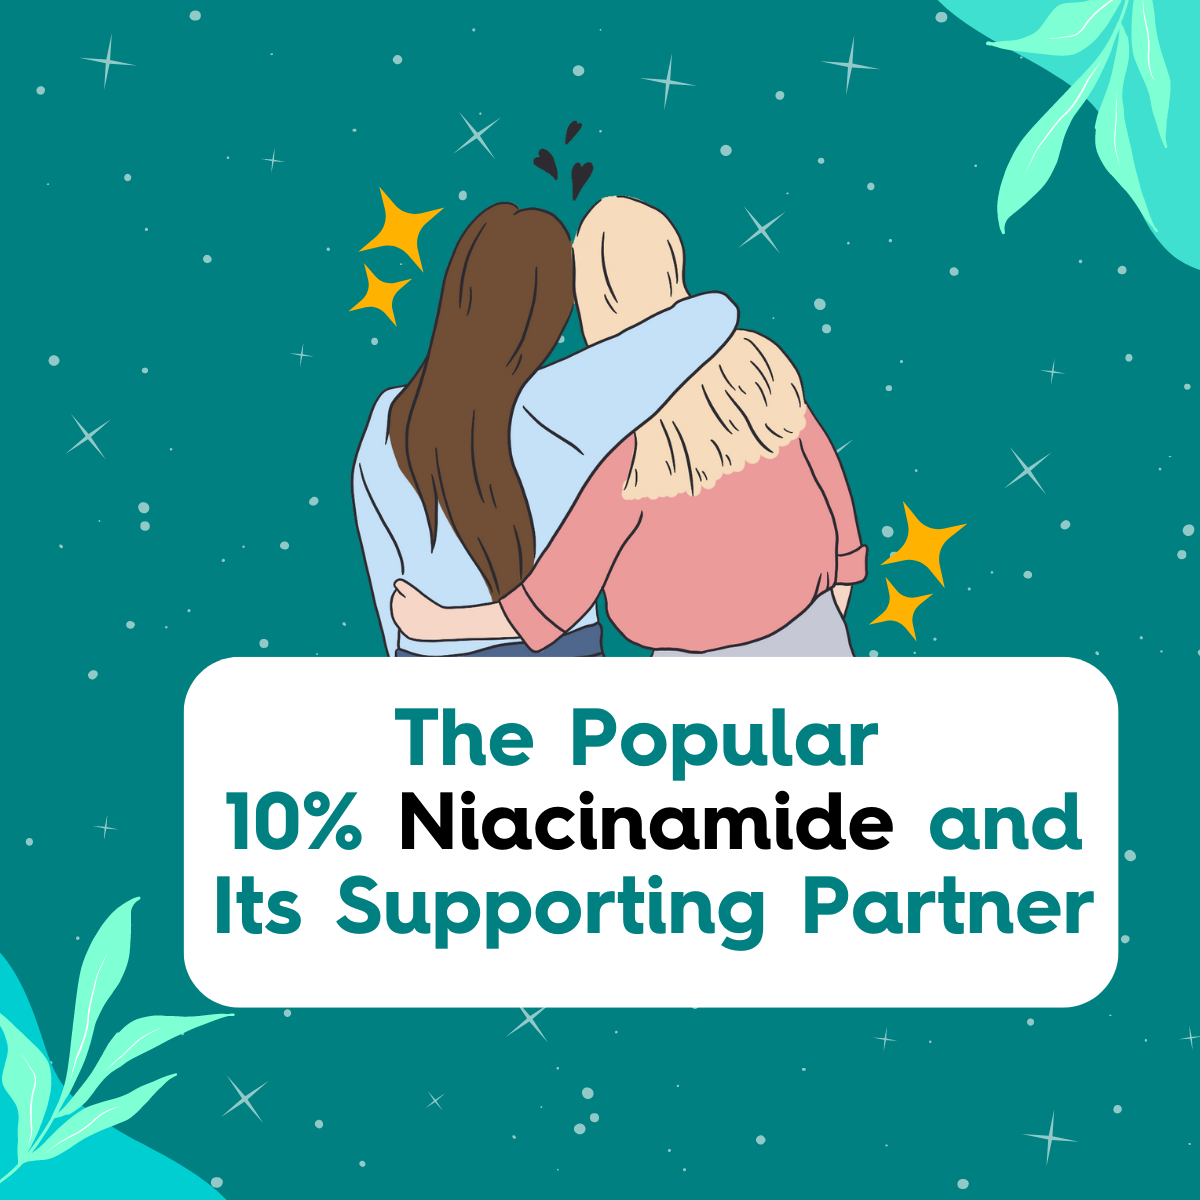 The Popular 10% Niacinamide and Its Supporting Partner